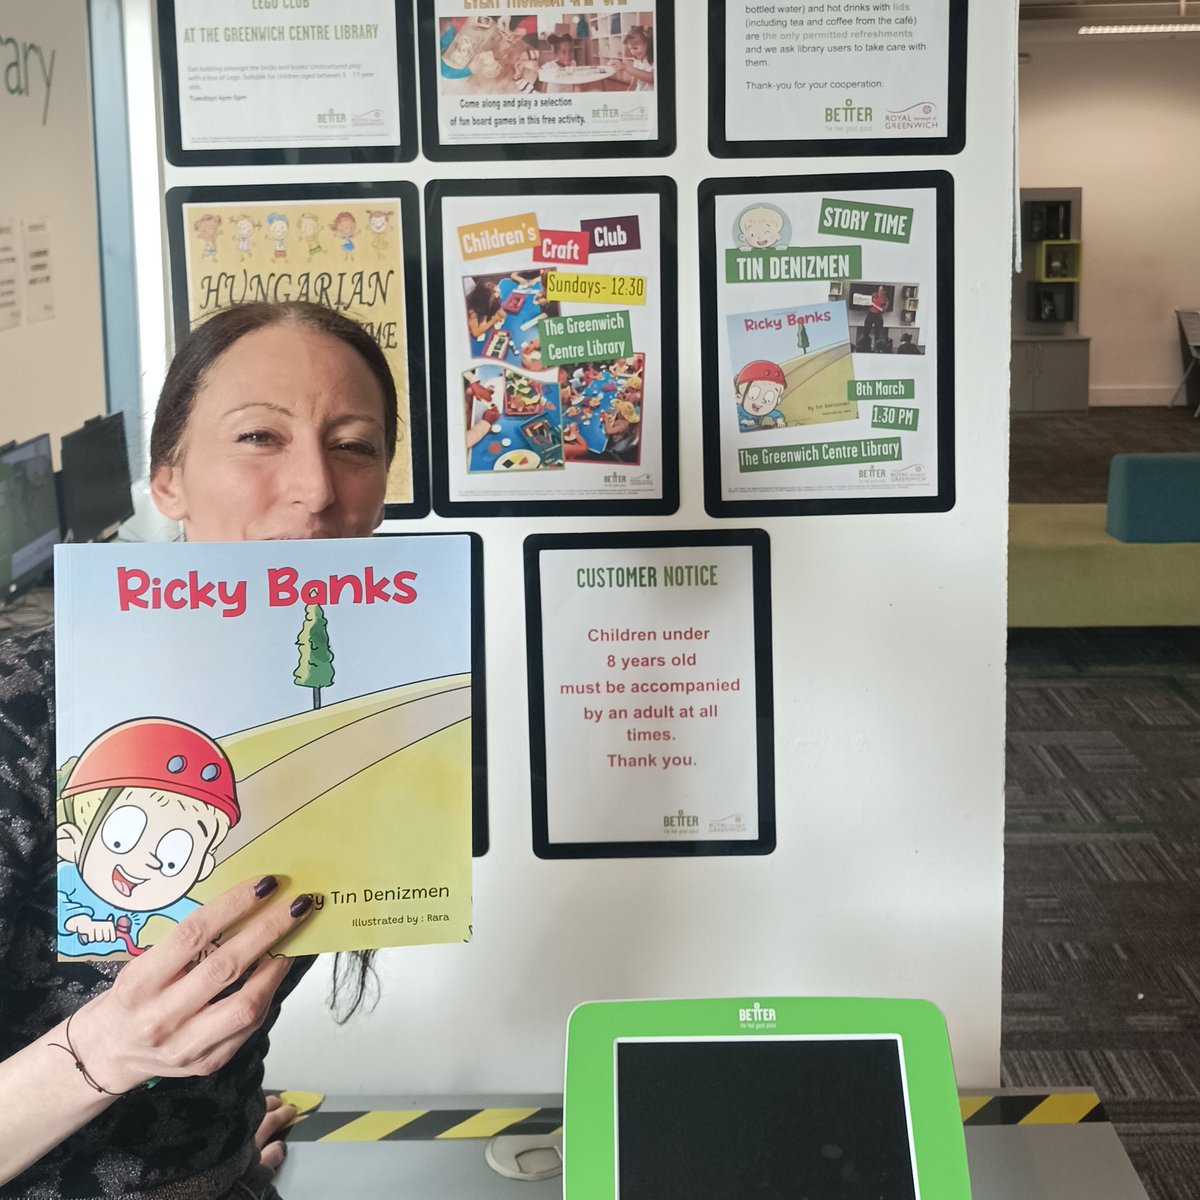 We had a great story time today with @denizmenbooks! @GreenwichLibs @Royal_Greenwich @Better_UK #LoveLibraries